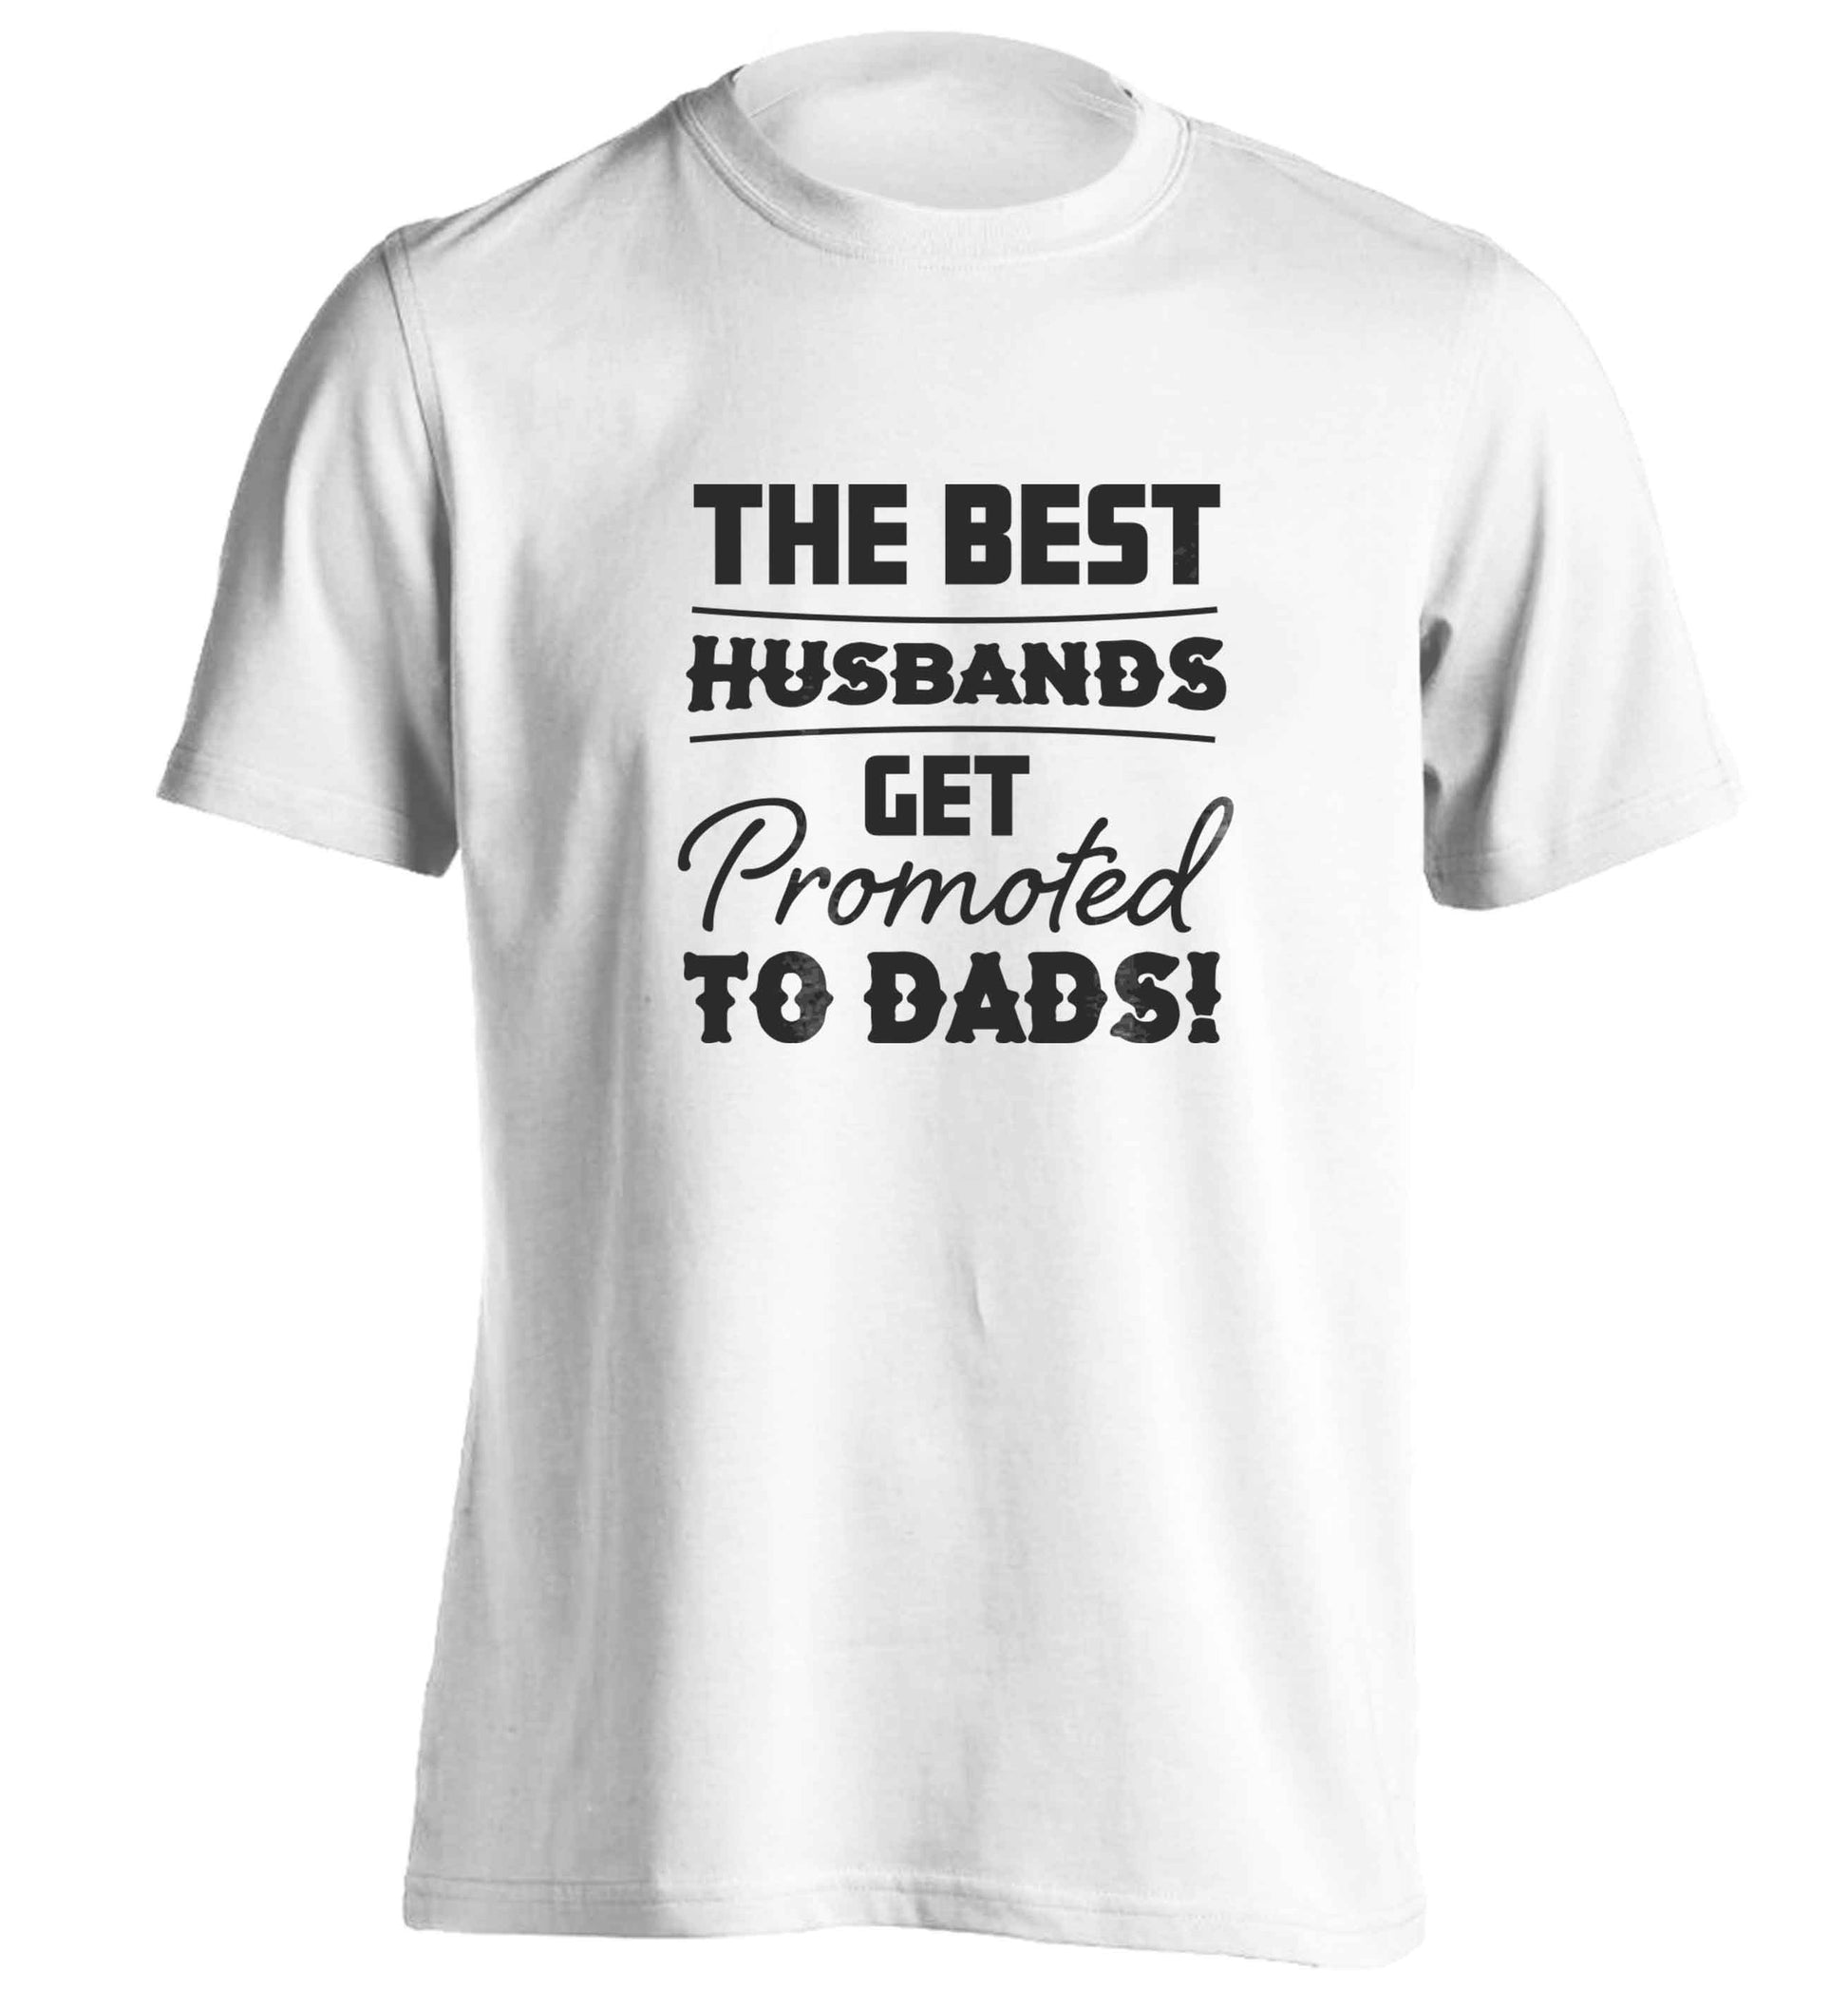 The best husbands get promoted to Dads adults unisex white Tshirt 2XL